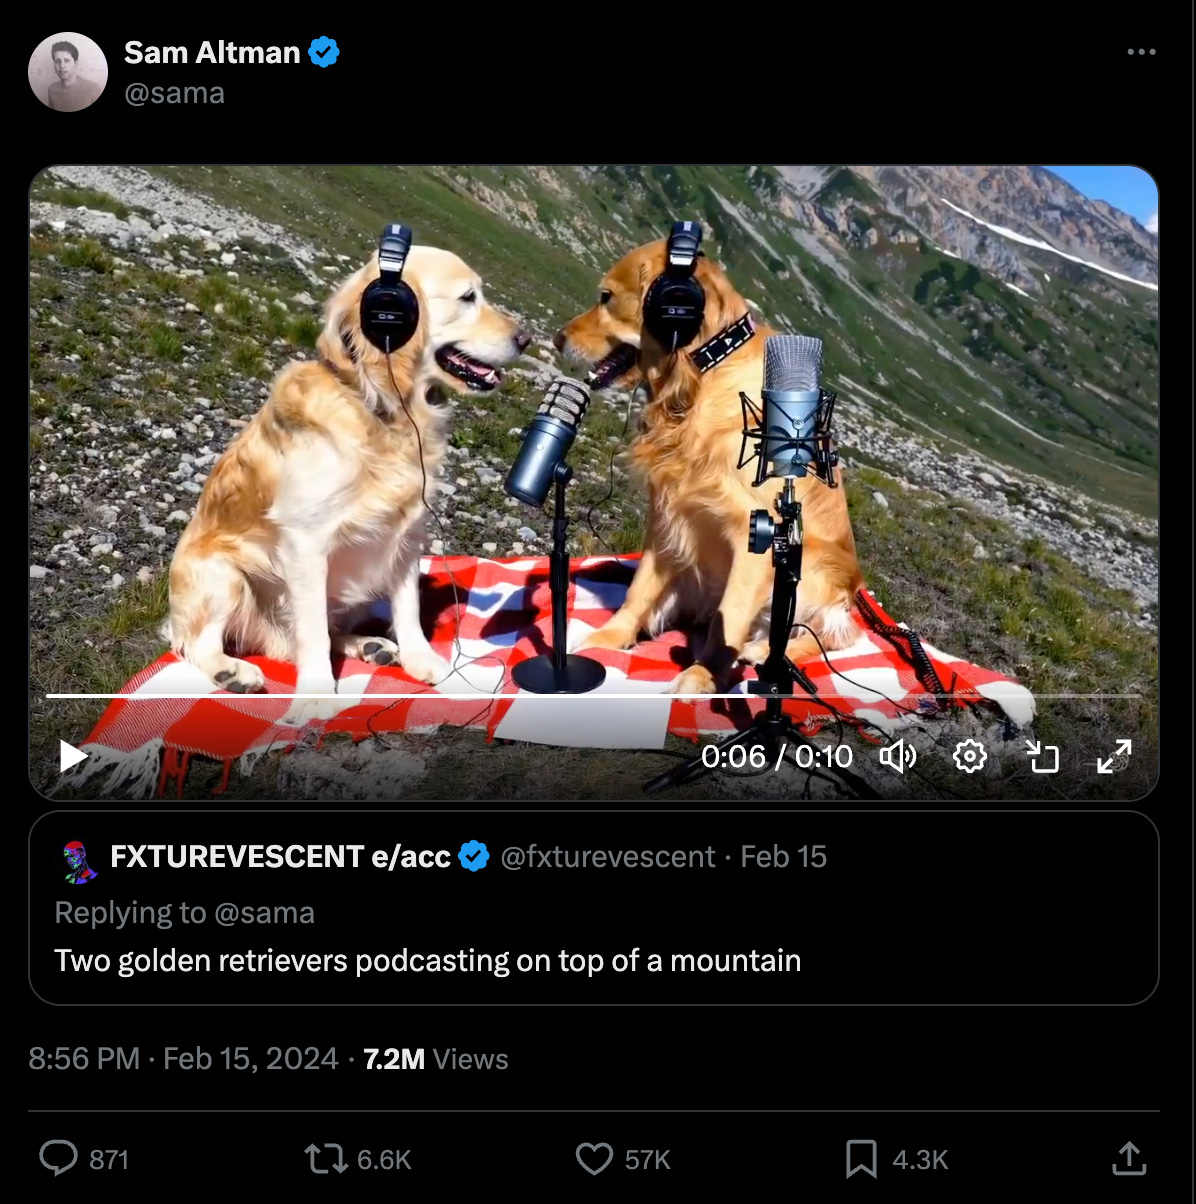 A tweet from Sam Altman quote-tweeting someone saying "two dogs podcasting on top of a mountain." His tweet is a still from a video of two golden retrievers in headphones in front of a mic on a. mountain.